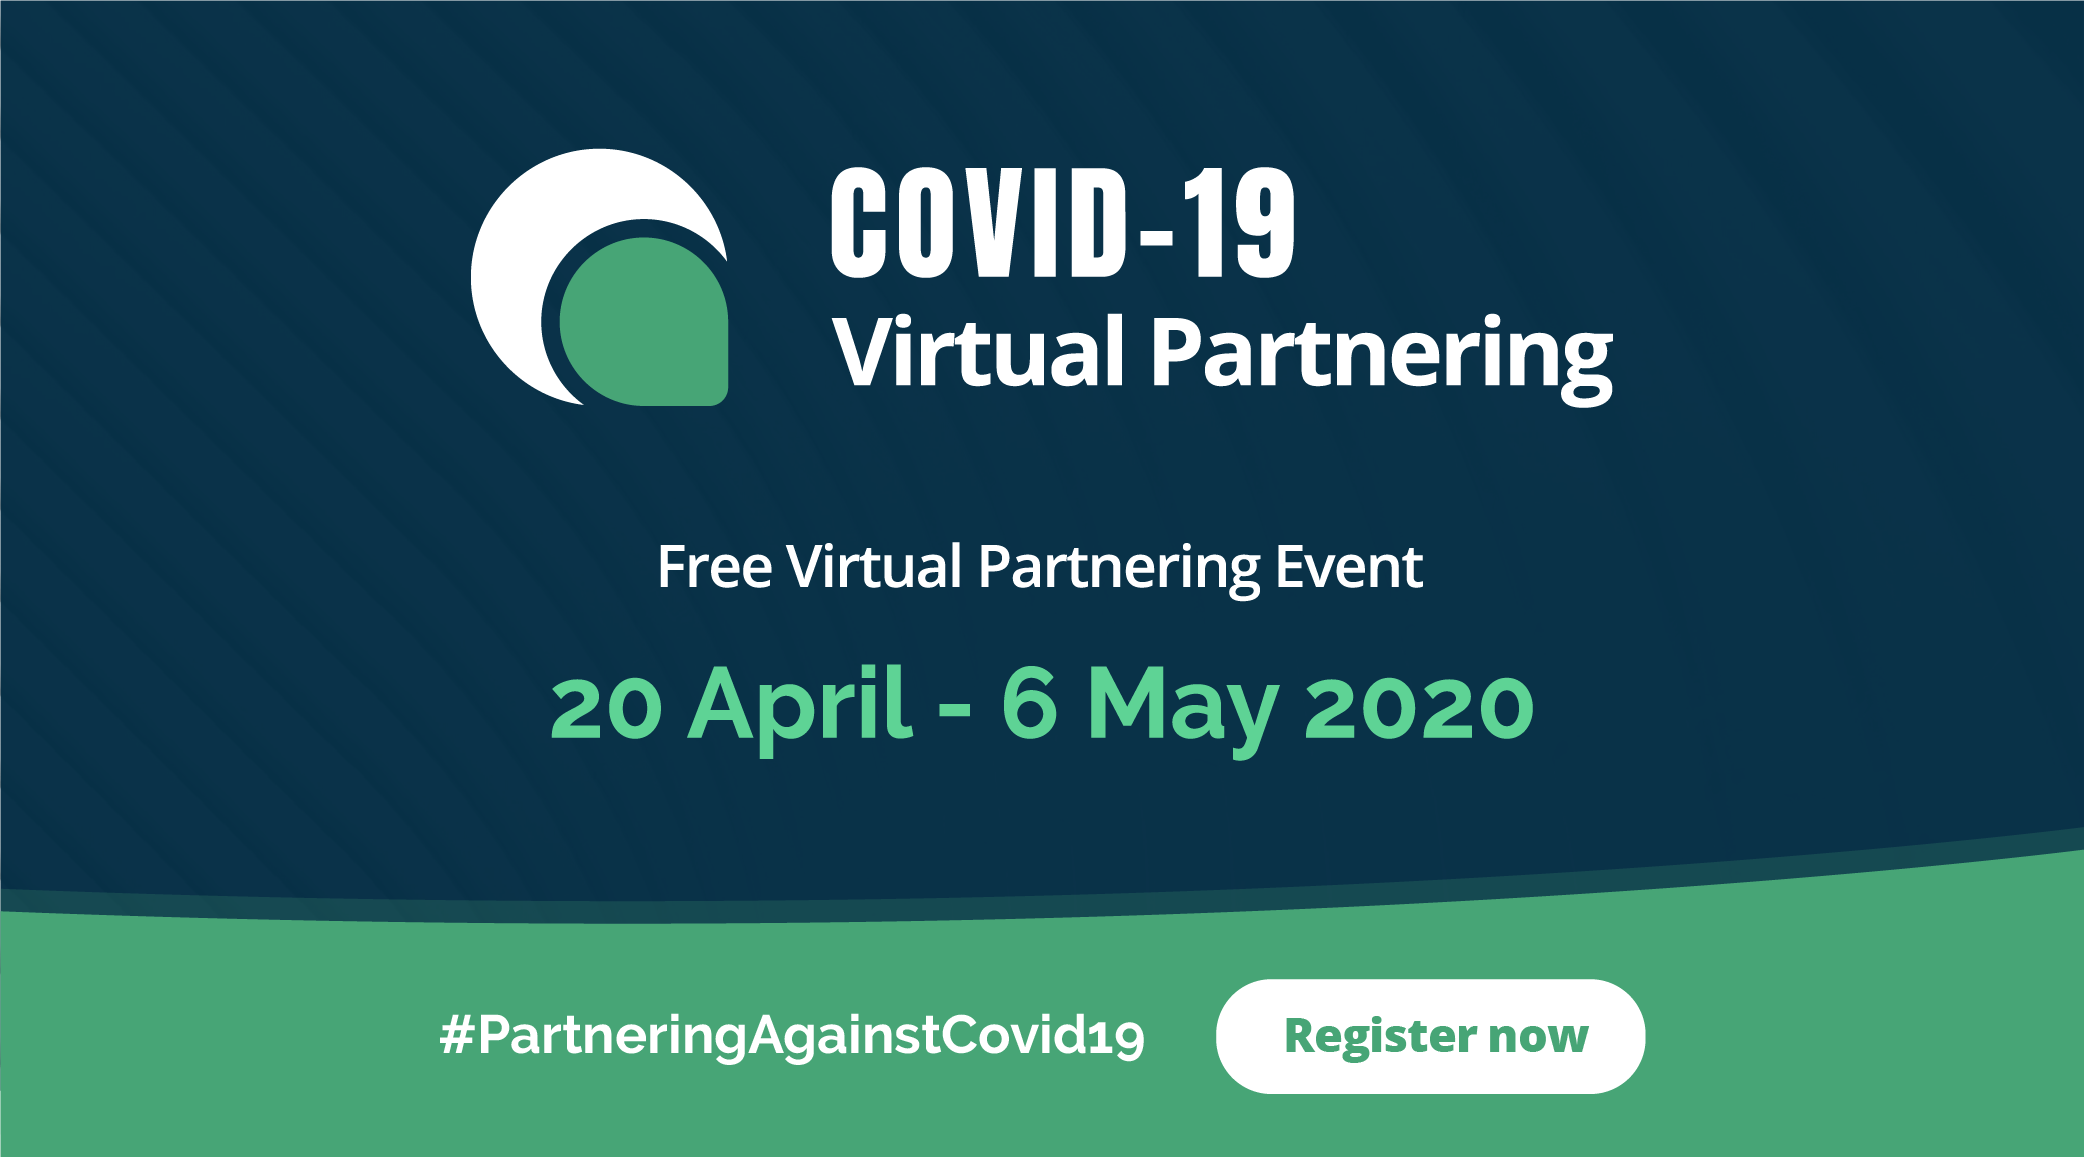 DrugBank joins as a supporter of Global Virtual Partnering Event to accelerate partnerships in the life sciences industry to fight COVID-19